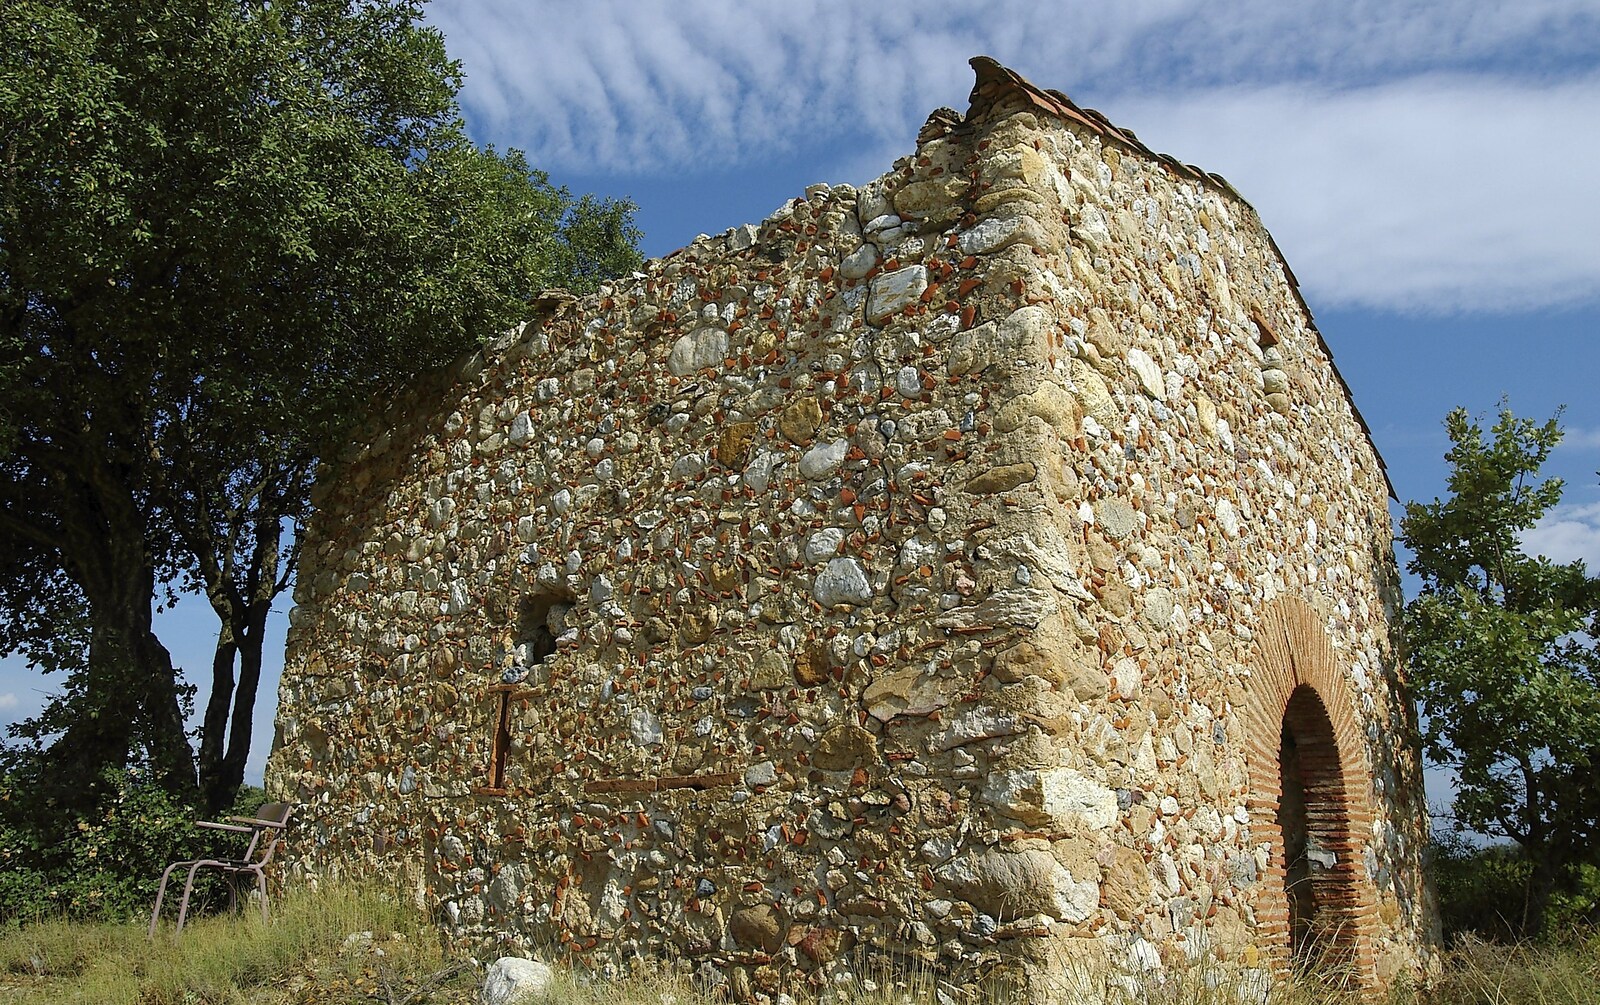 A derelict hut from A Roussillon Farmhouse, Fourques, Perpignan, France - 17th September 2006